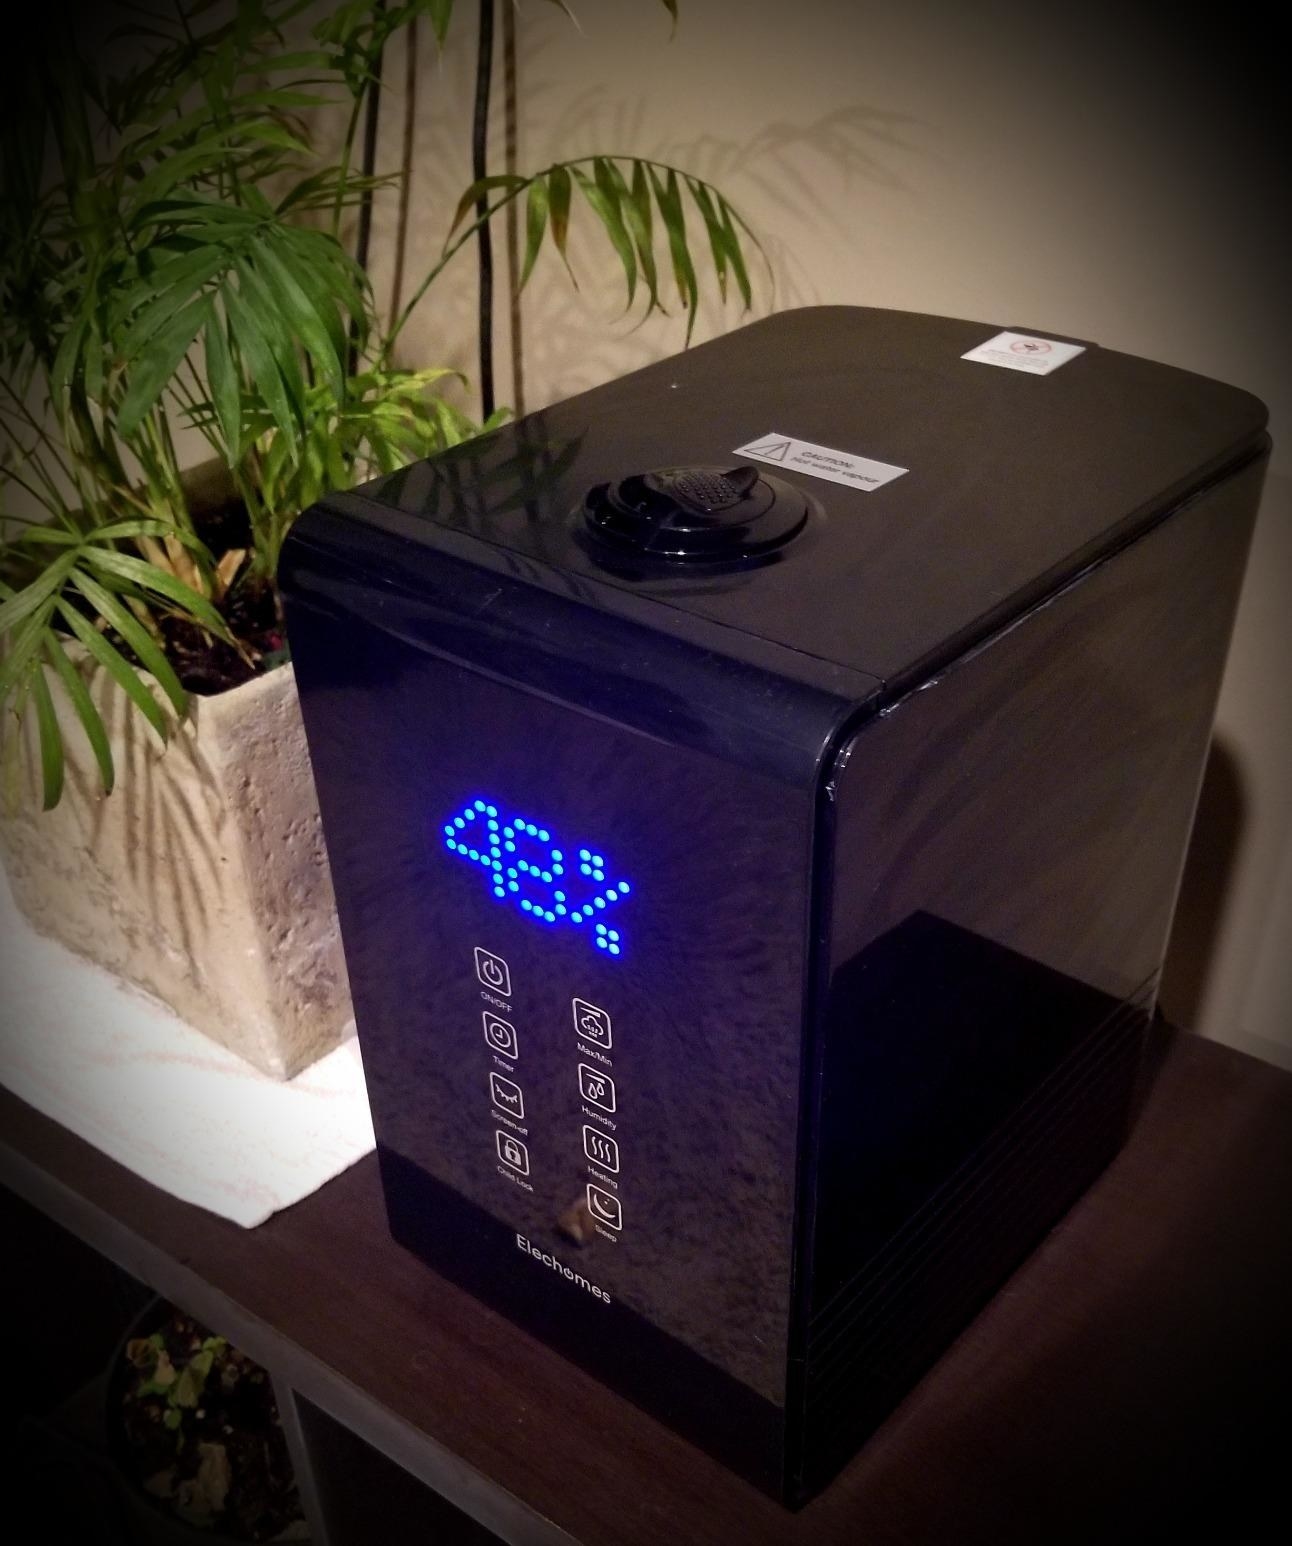 reviewer image of the black humidifier on a wooden table